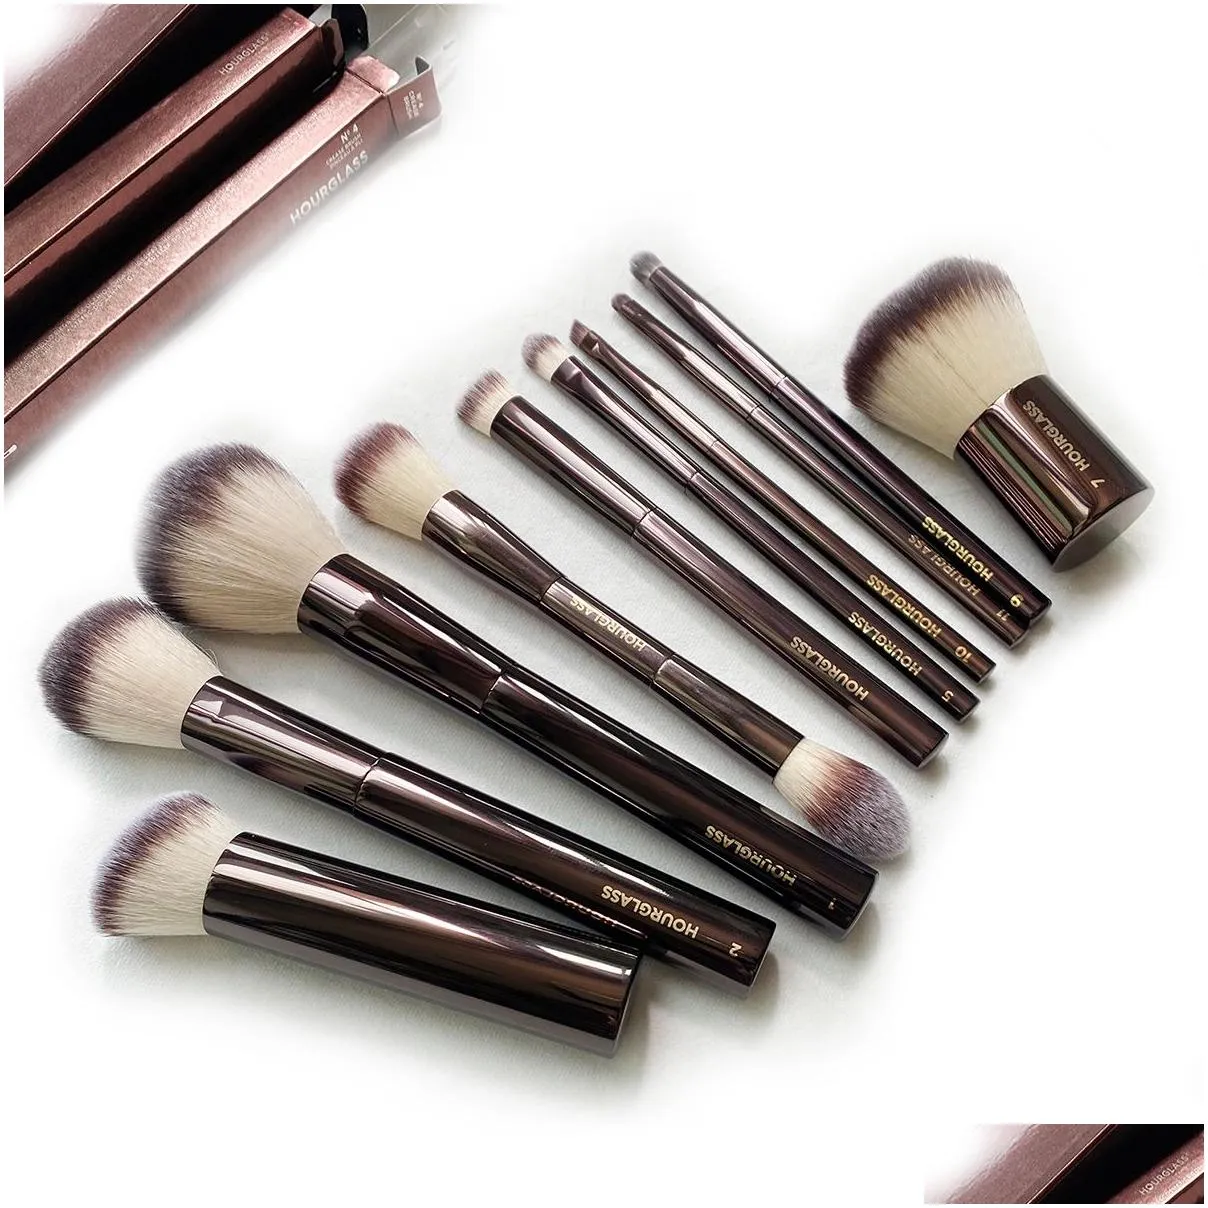 Hourglass Makeup Brushes Set 10Pcs Cosmetic Brush for Face Powder Blush Eye Shadow Crease Concealer Brow Liner Smudger Dark-Bronze Metal Handle Beauty